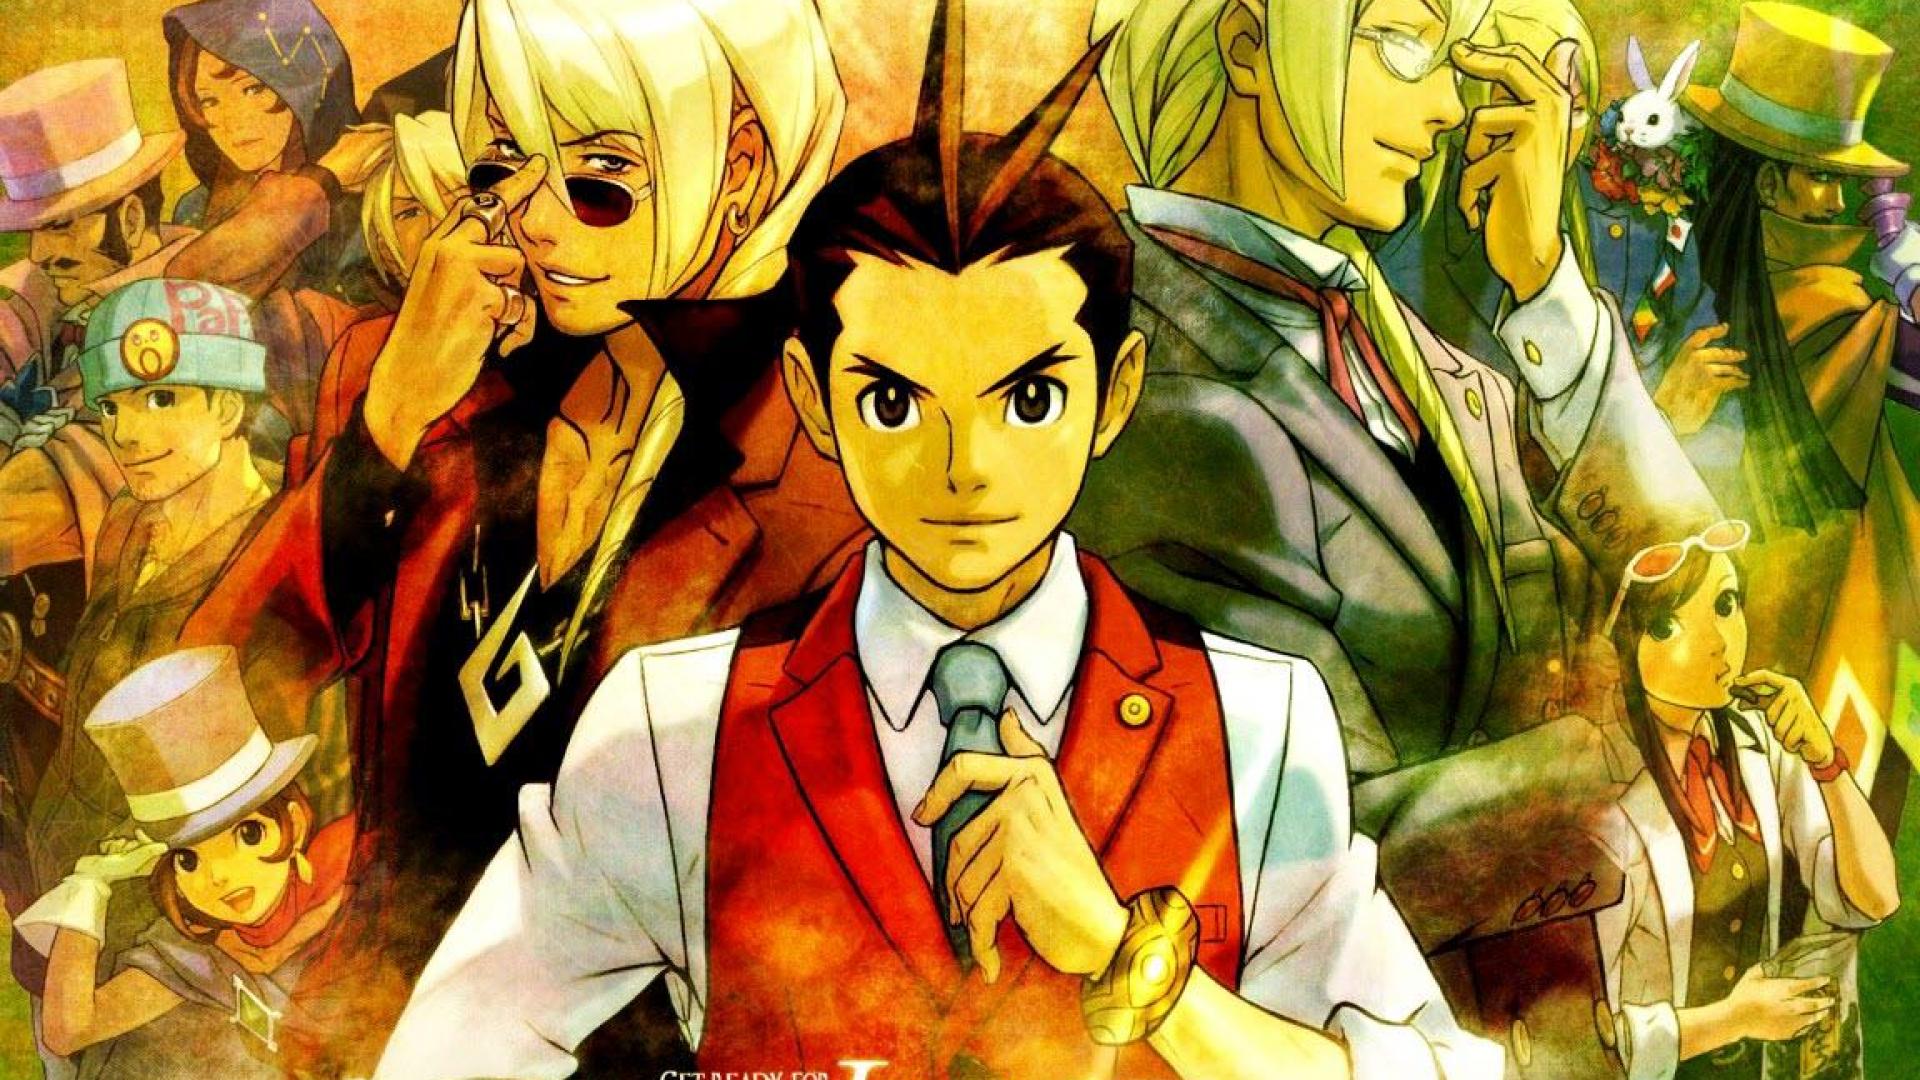 Apollo Justice High Quality And Resolution Wallpaper On